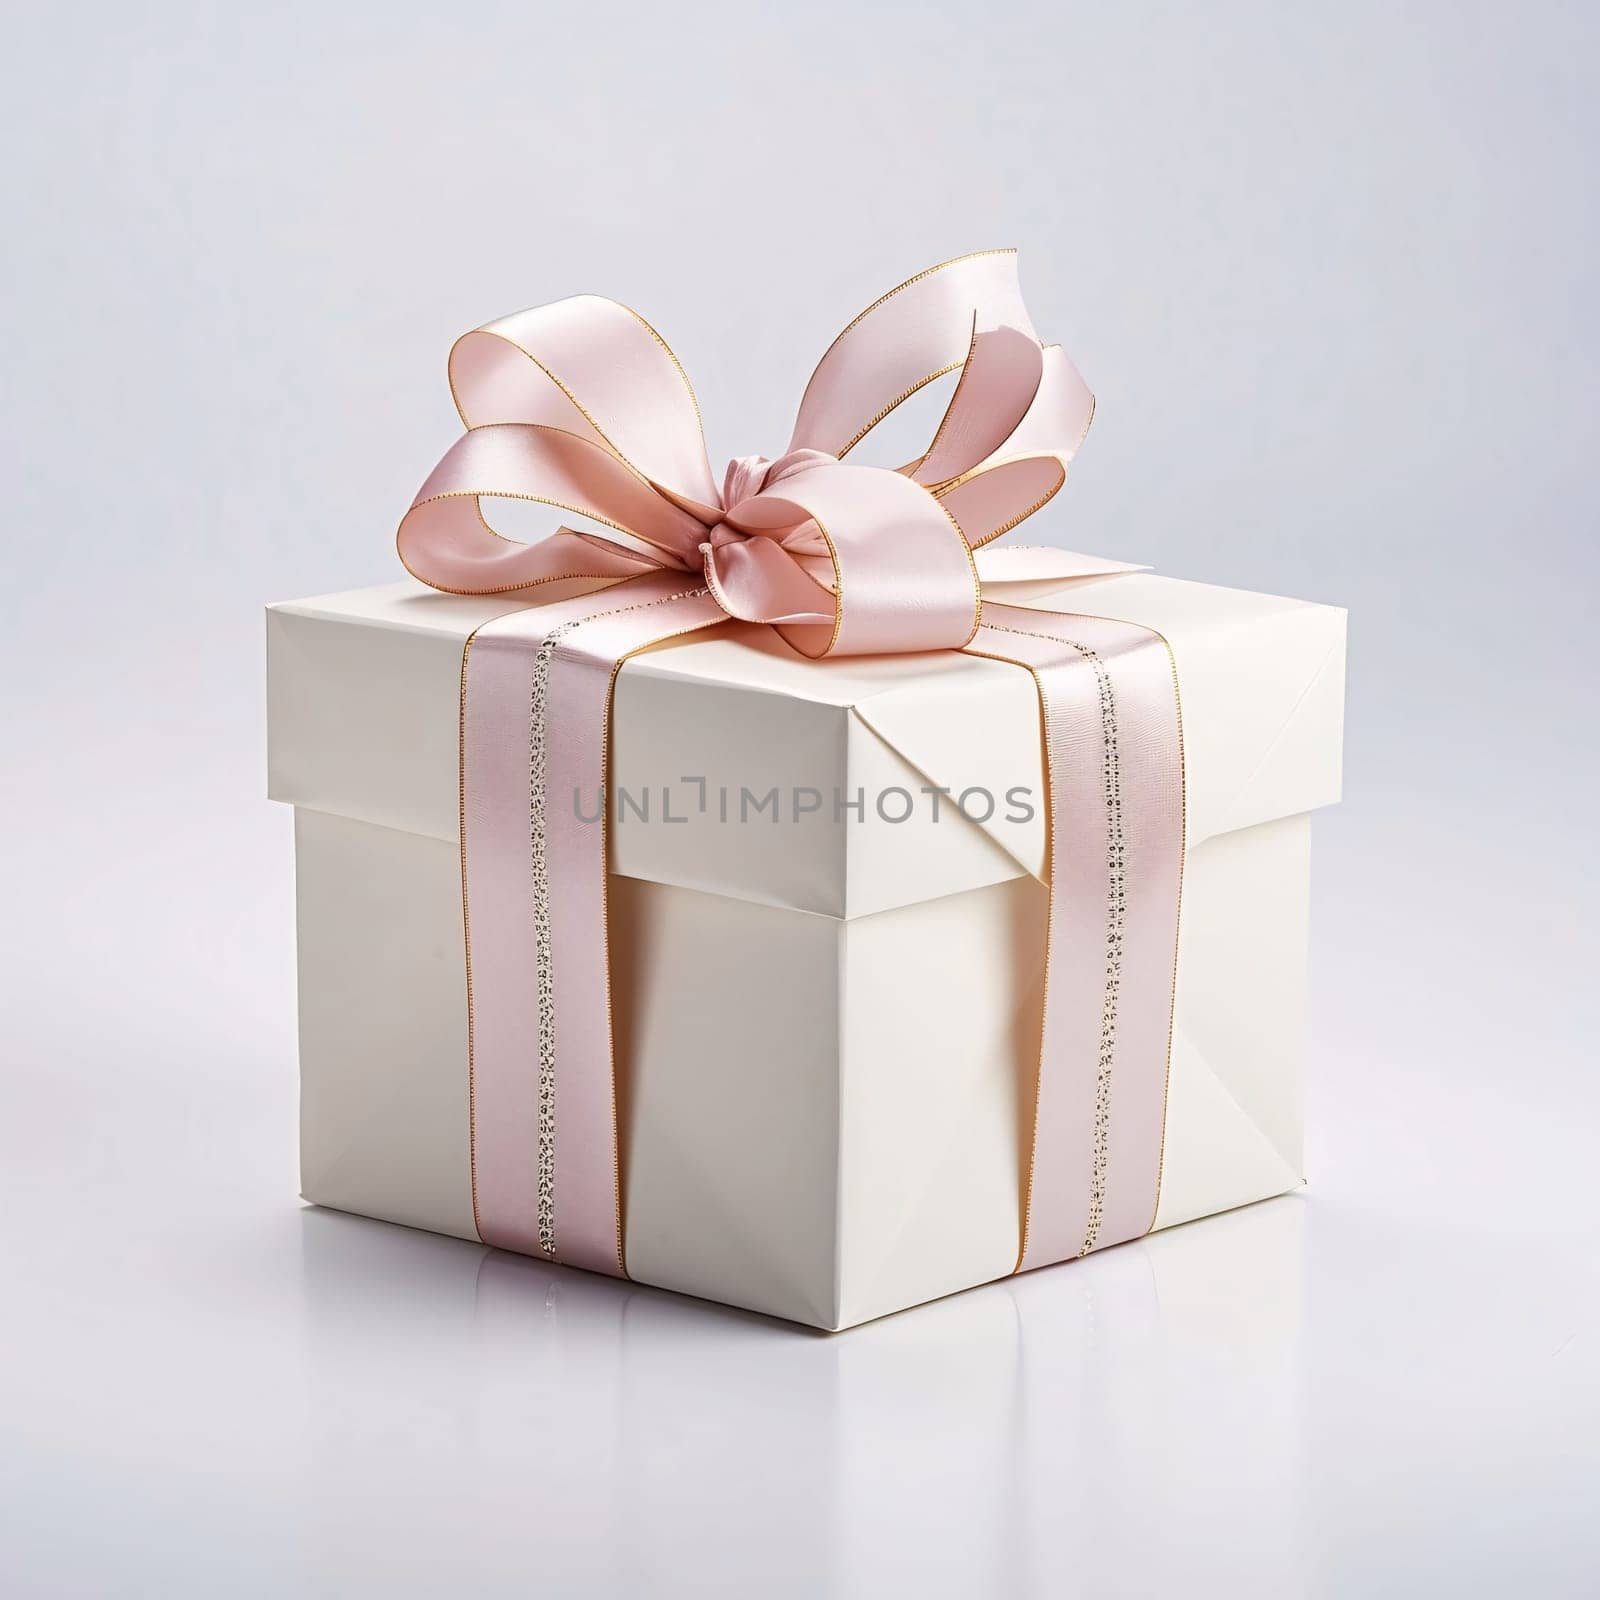 White gift with pink bow cities for the background. Gifts as a day symbol of present and love. A time of falling in love and love.